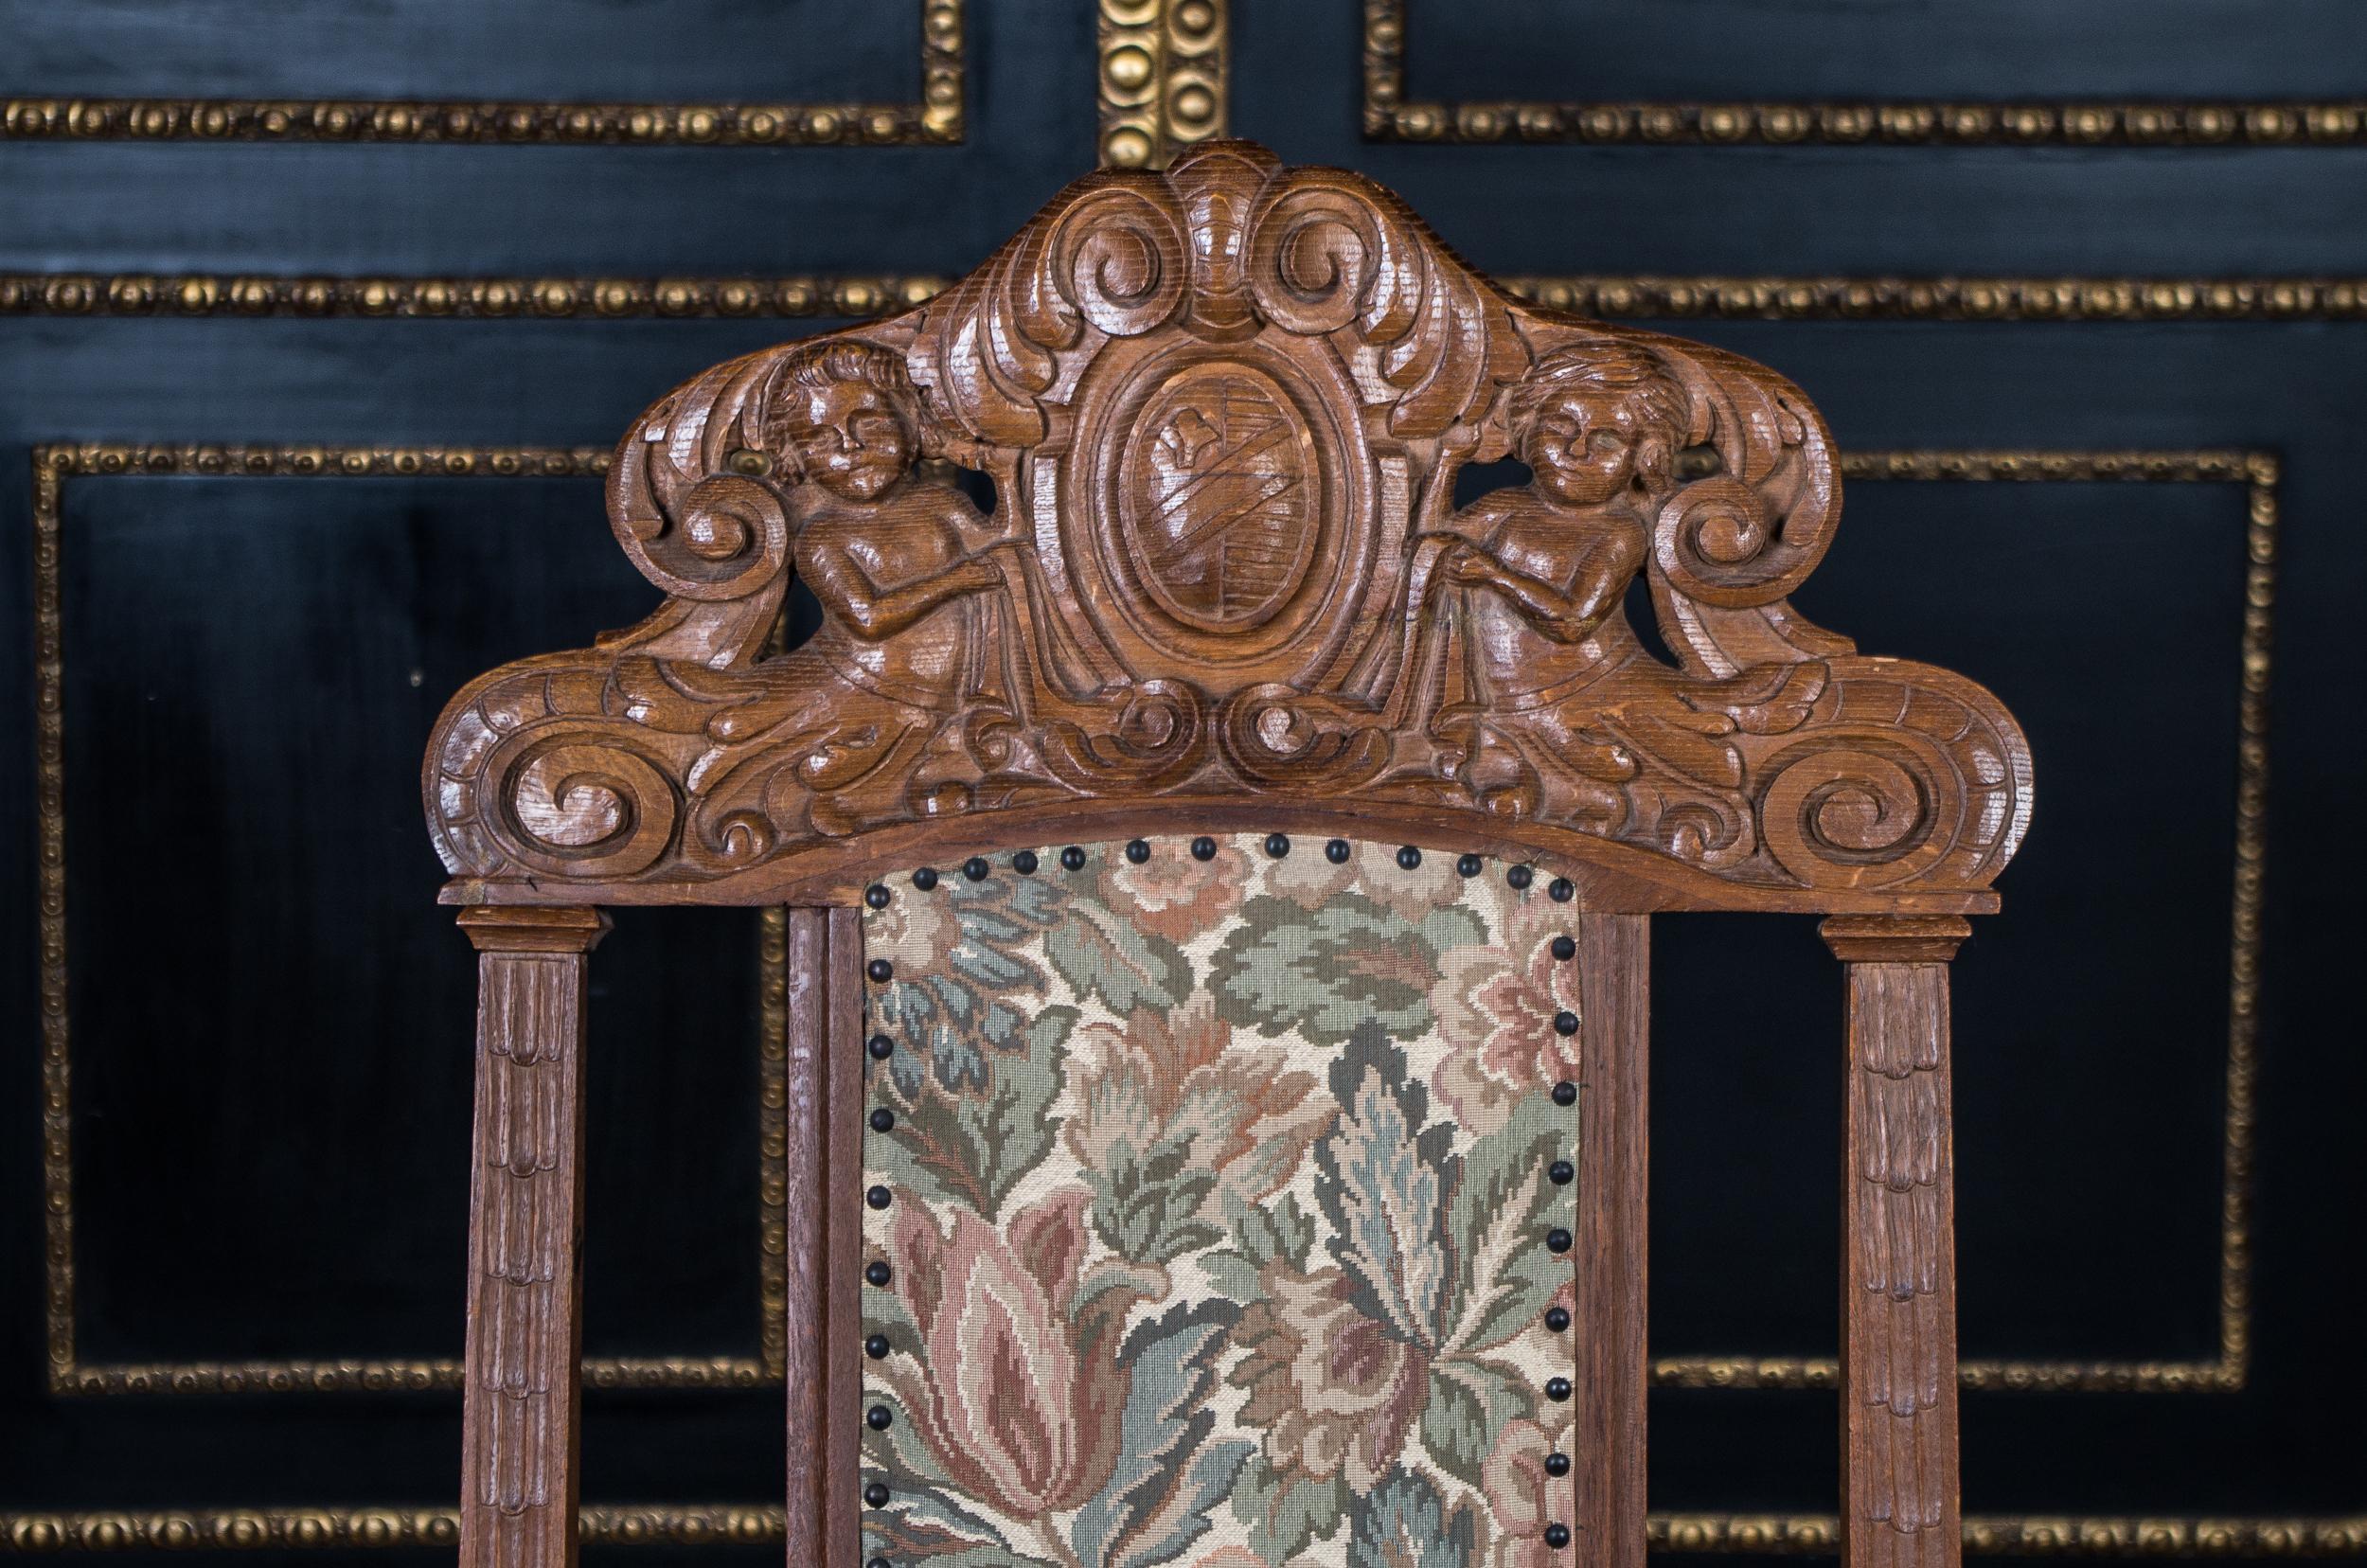 19th Century Historical Neo Renaissance Armchair with Lion Armrests, circa 1850-1870